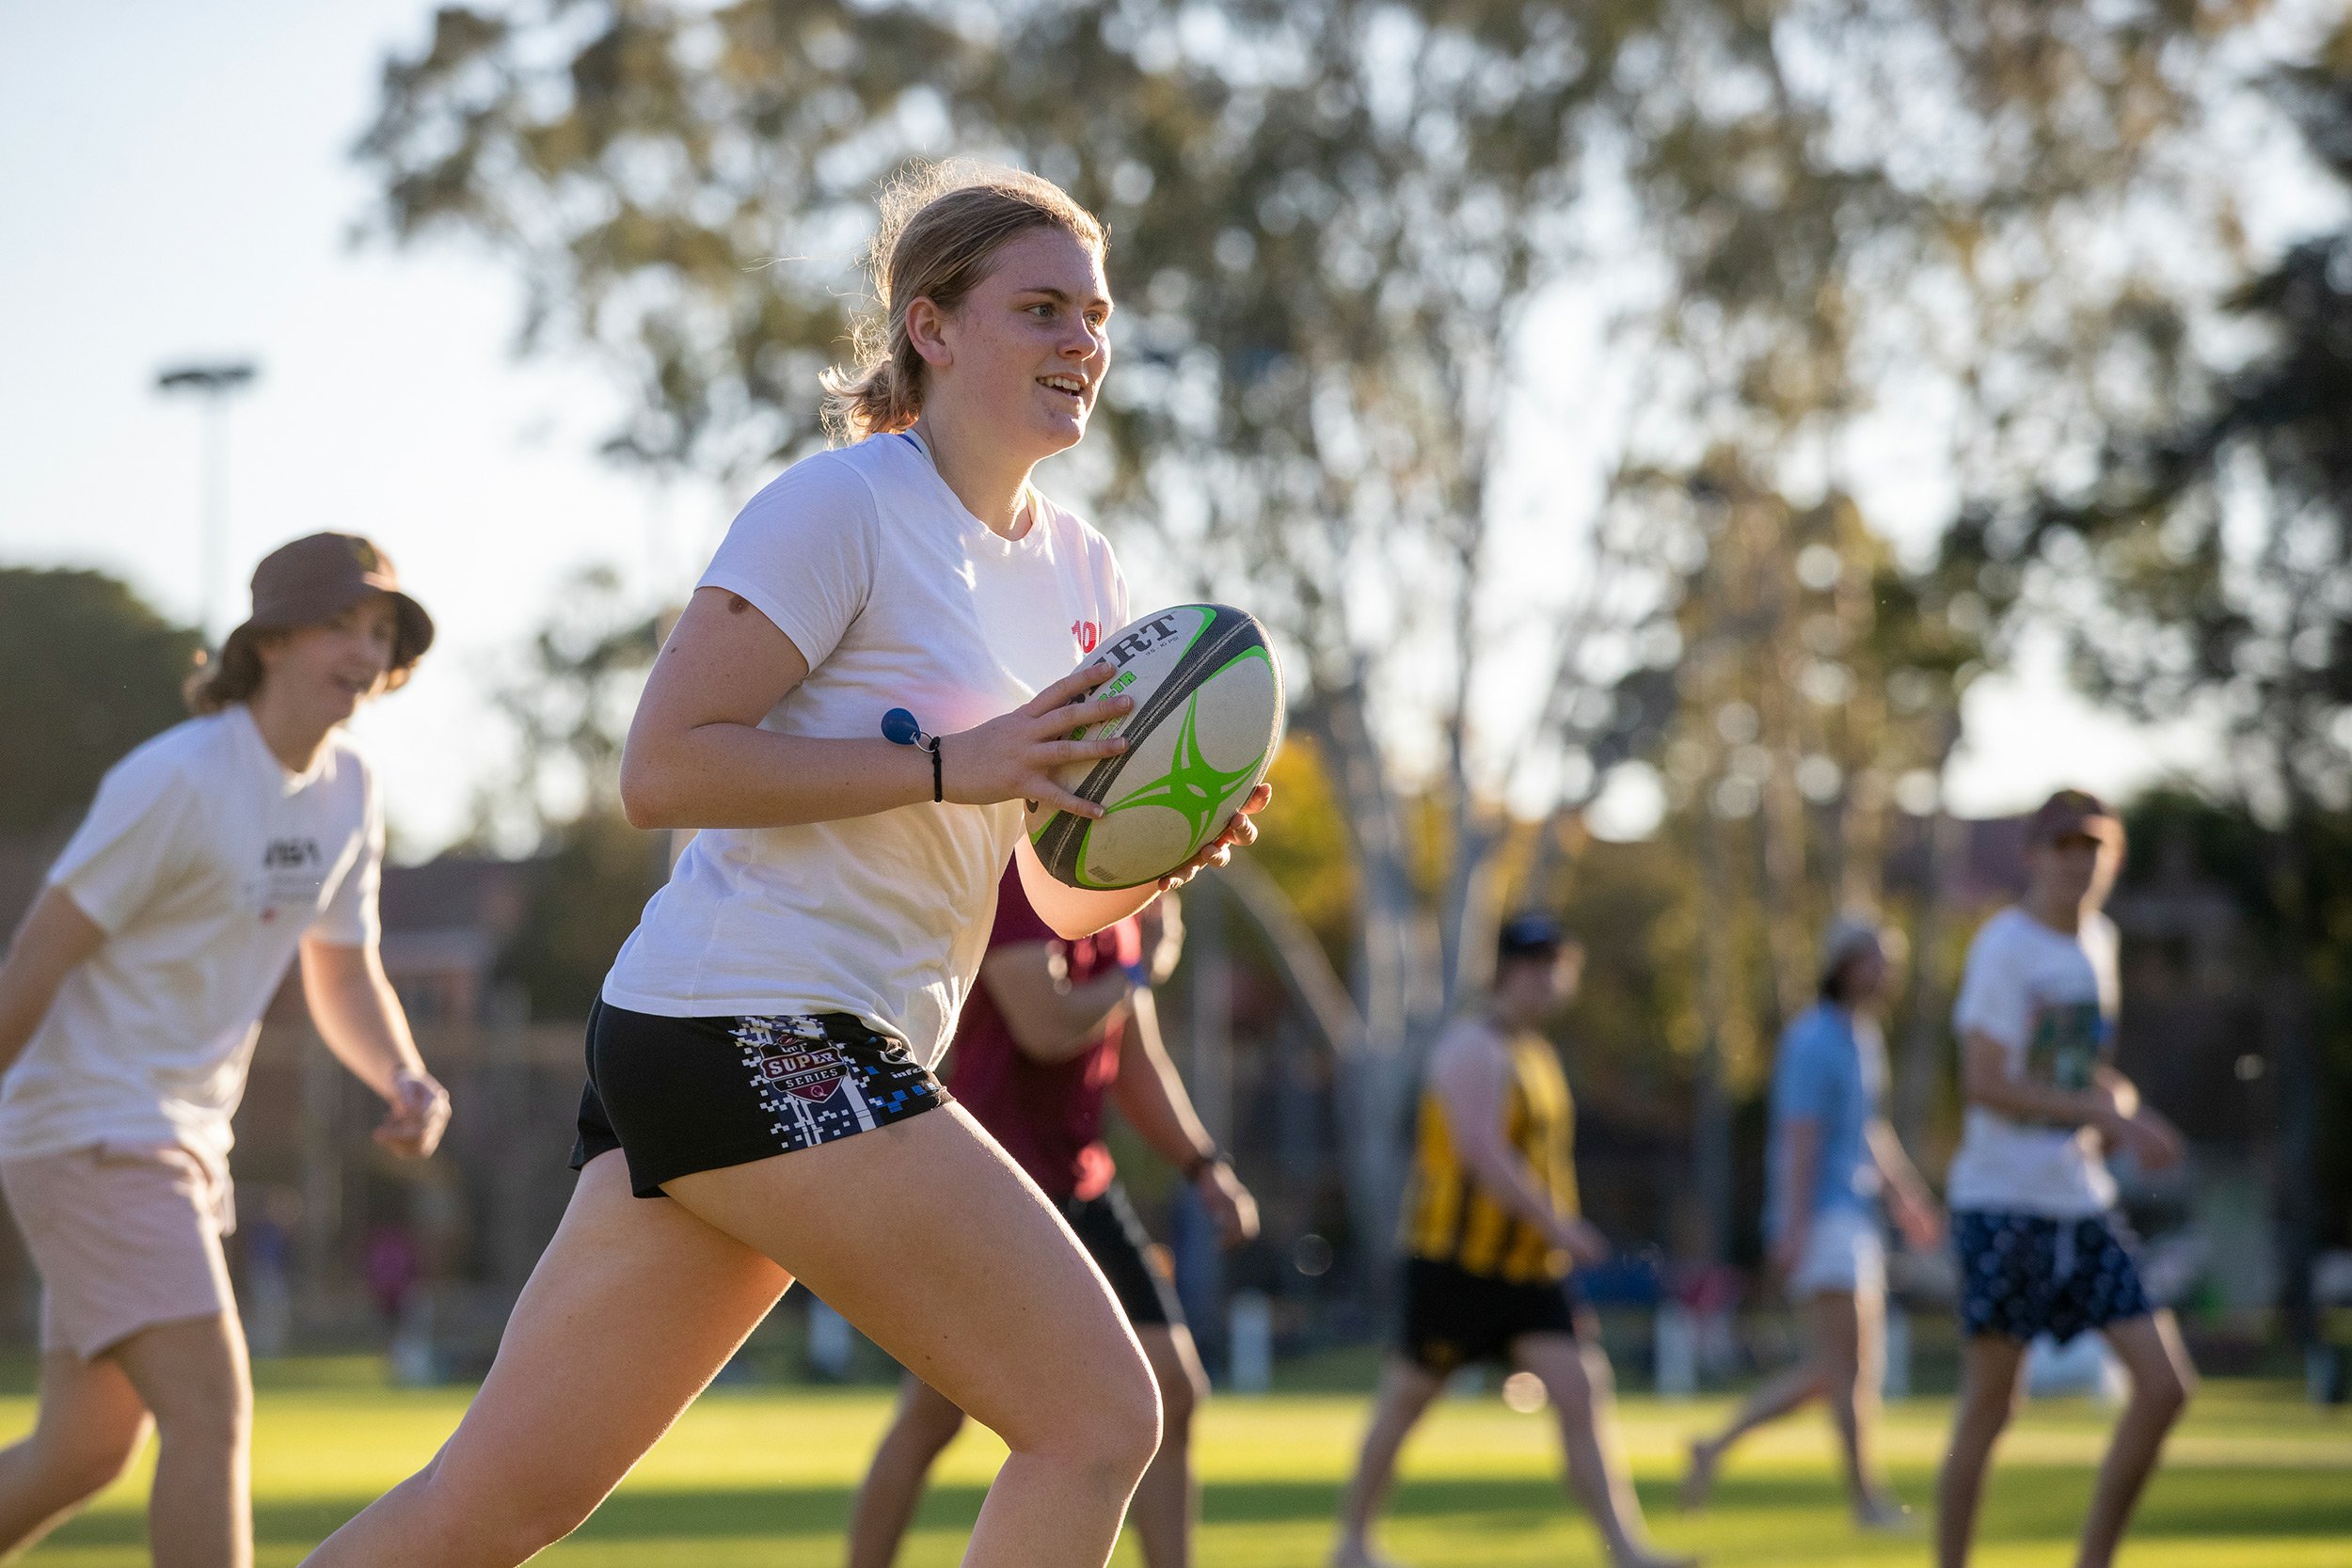 University of queensland touch footie on campus